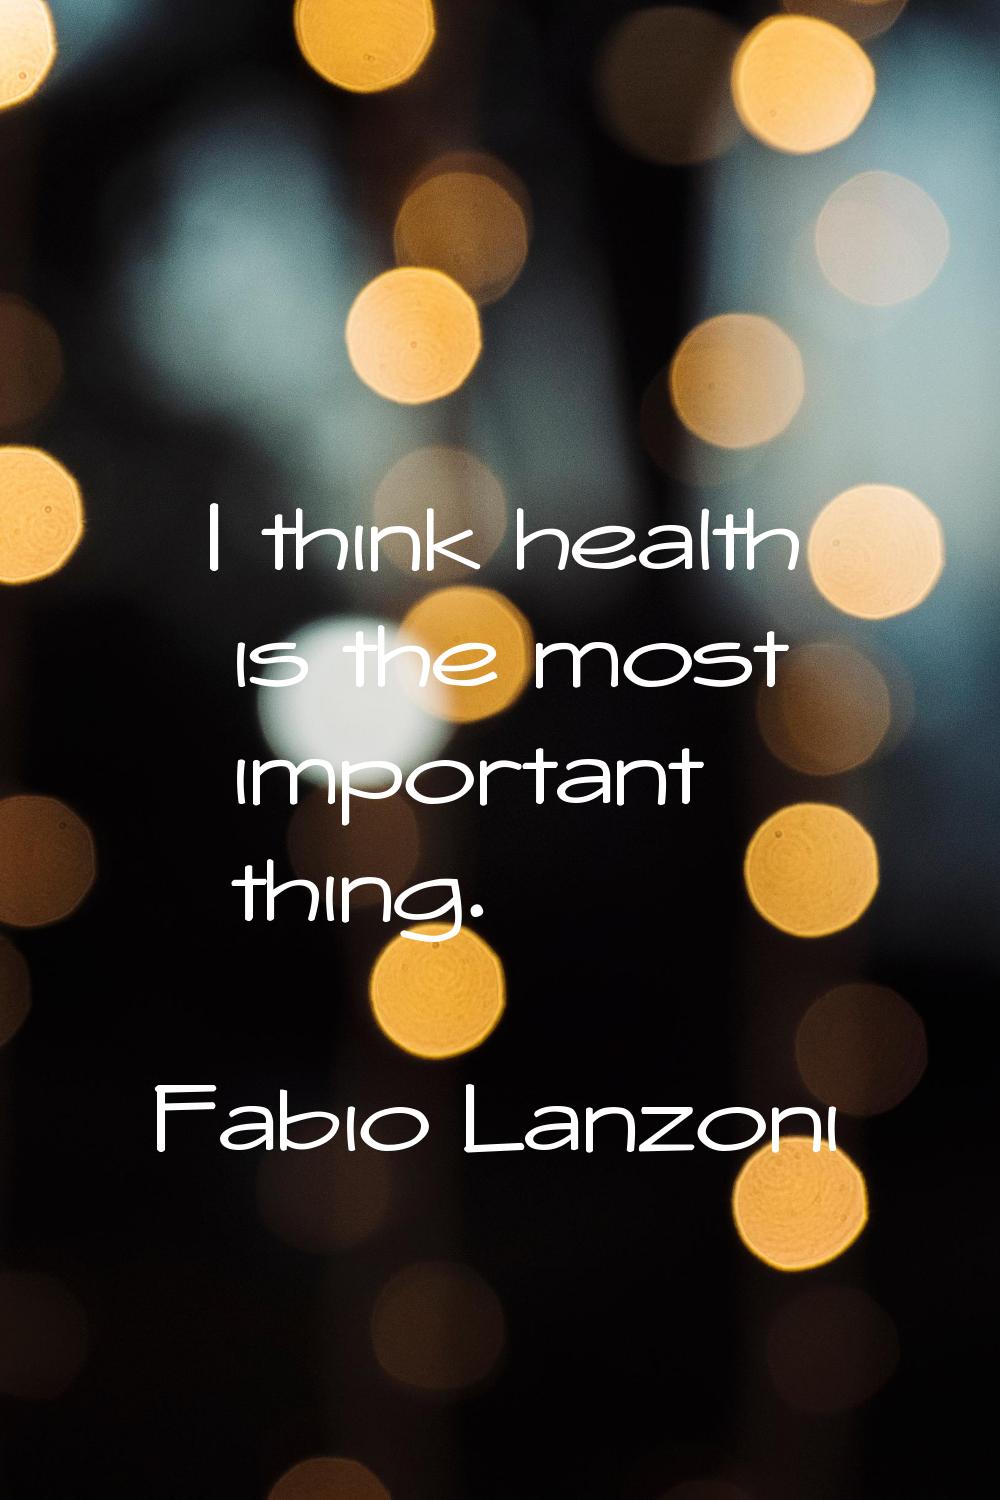 I think health is the most important thing.